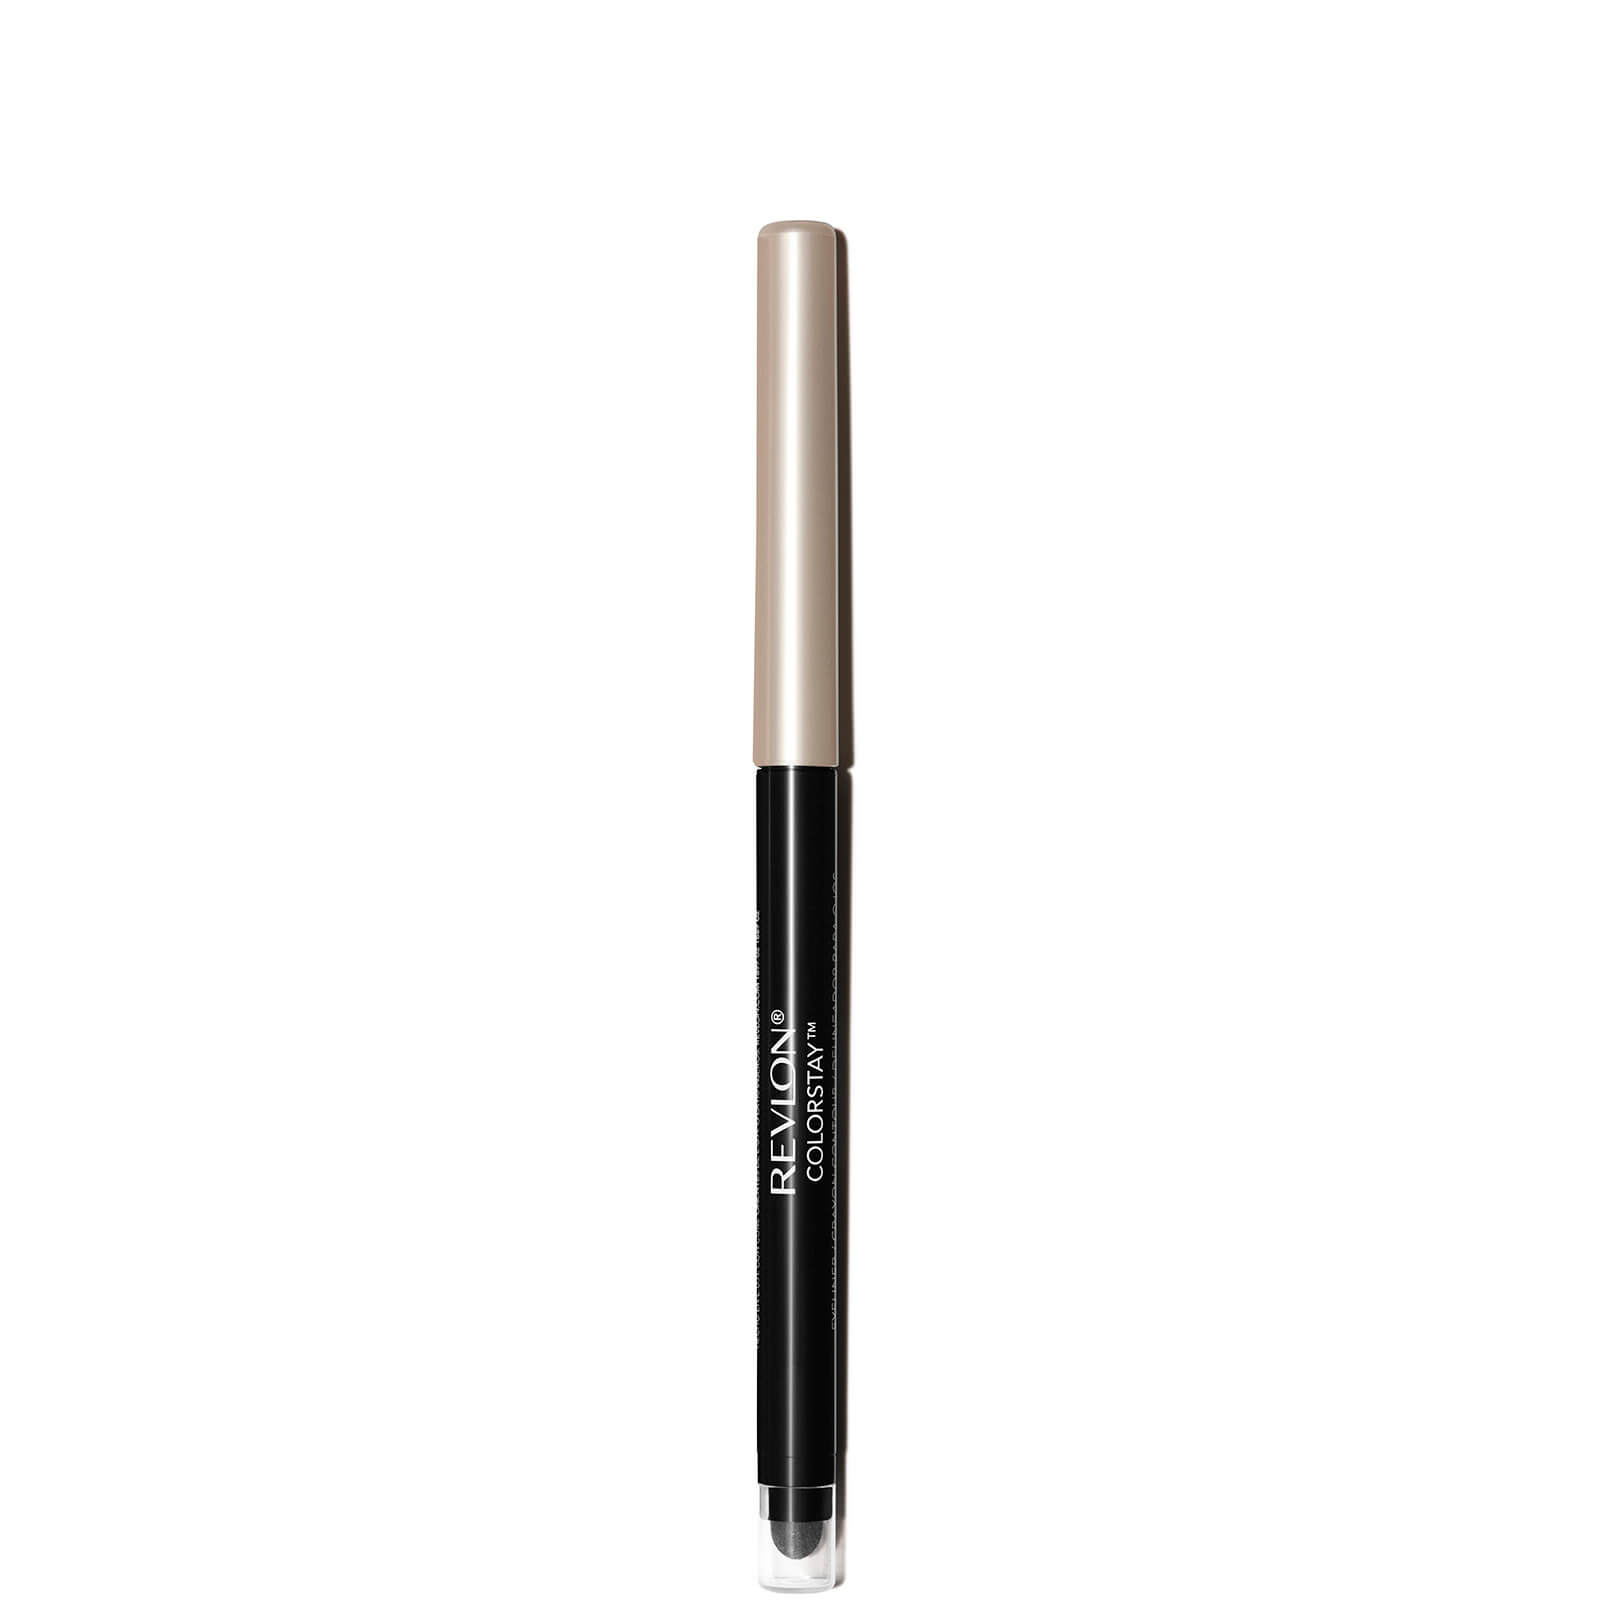 Revlon ColorStay Eyeliner Pencil 1.67g (Various Shades) - Taupe